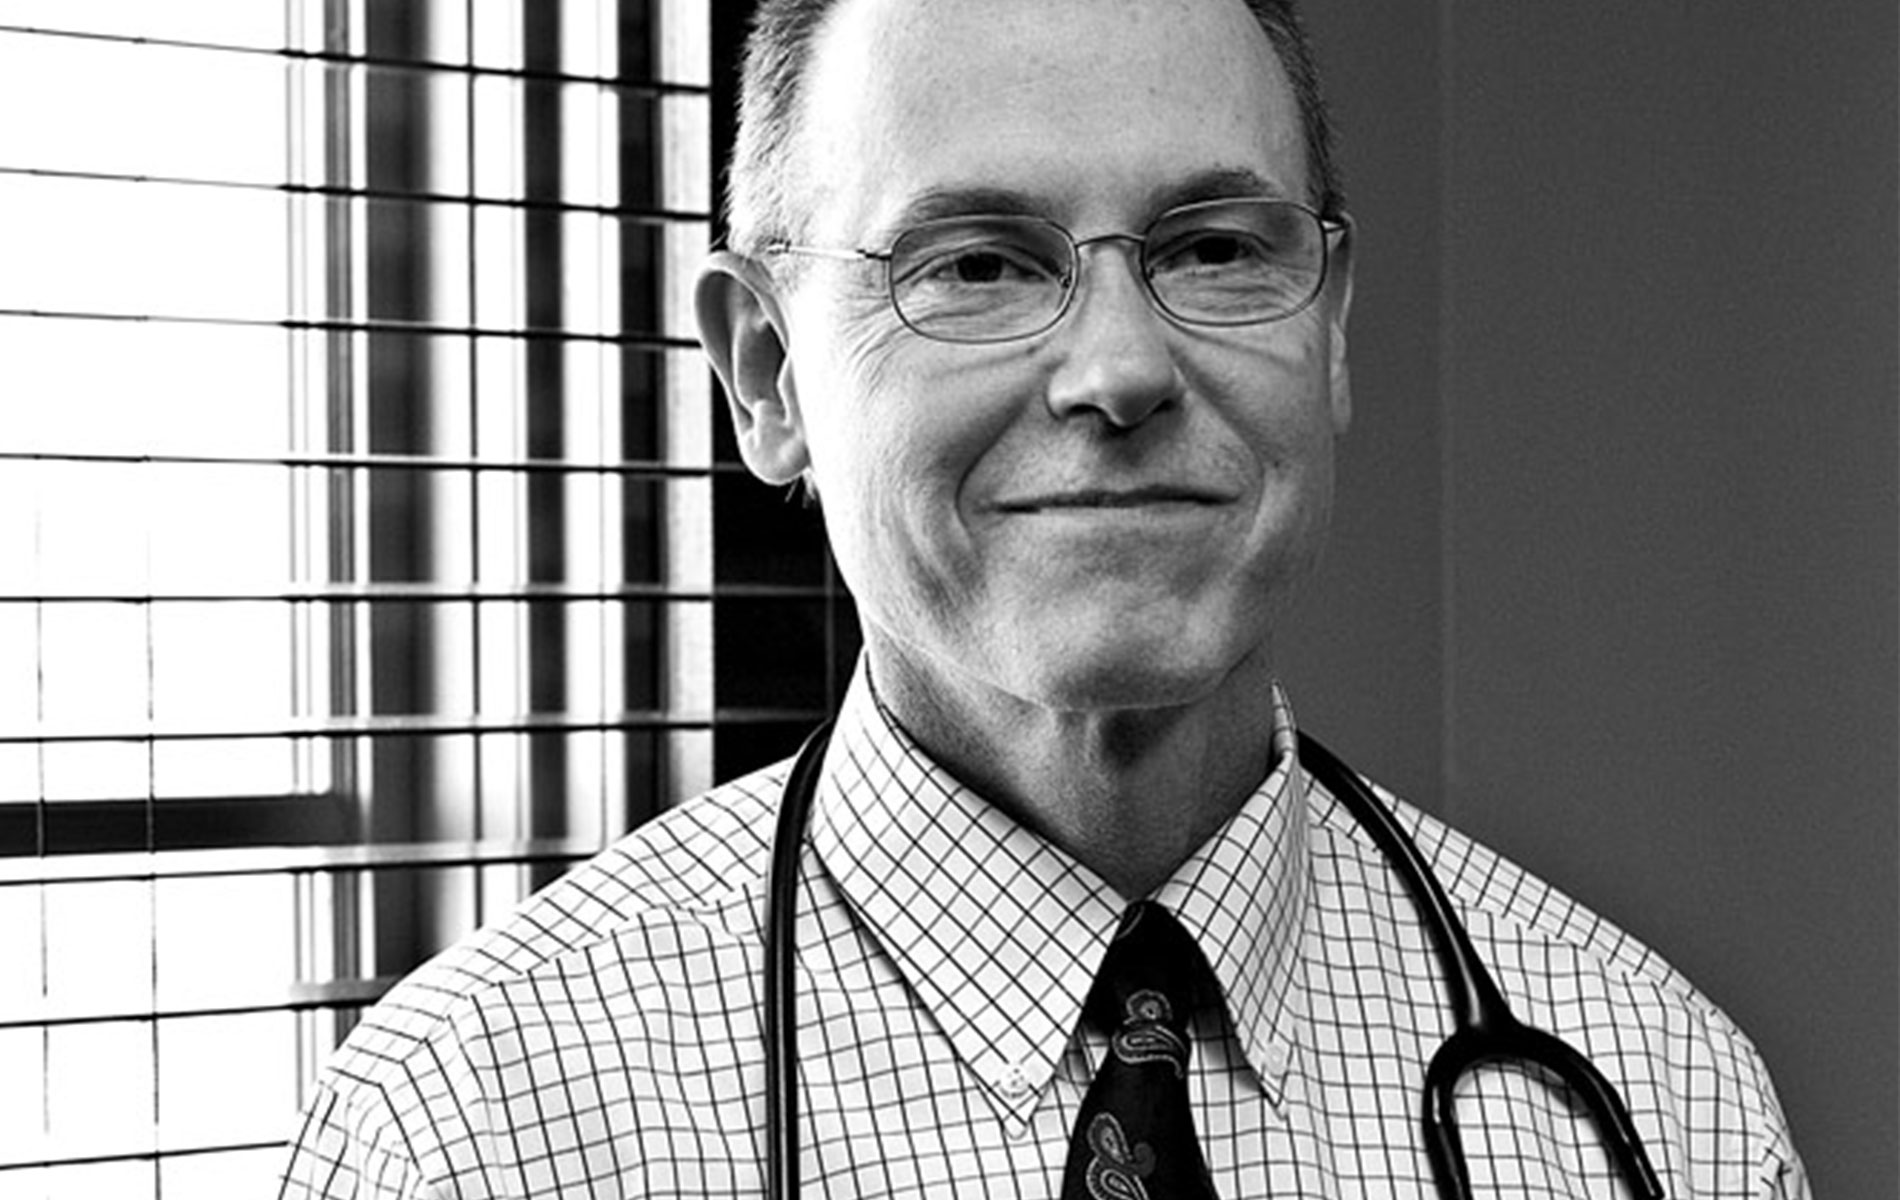 Dr. William E. Varnadore of Rosemary Beach, health, anti-aging; antiaging doctor